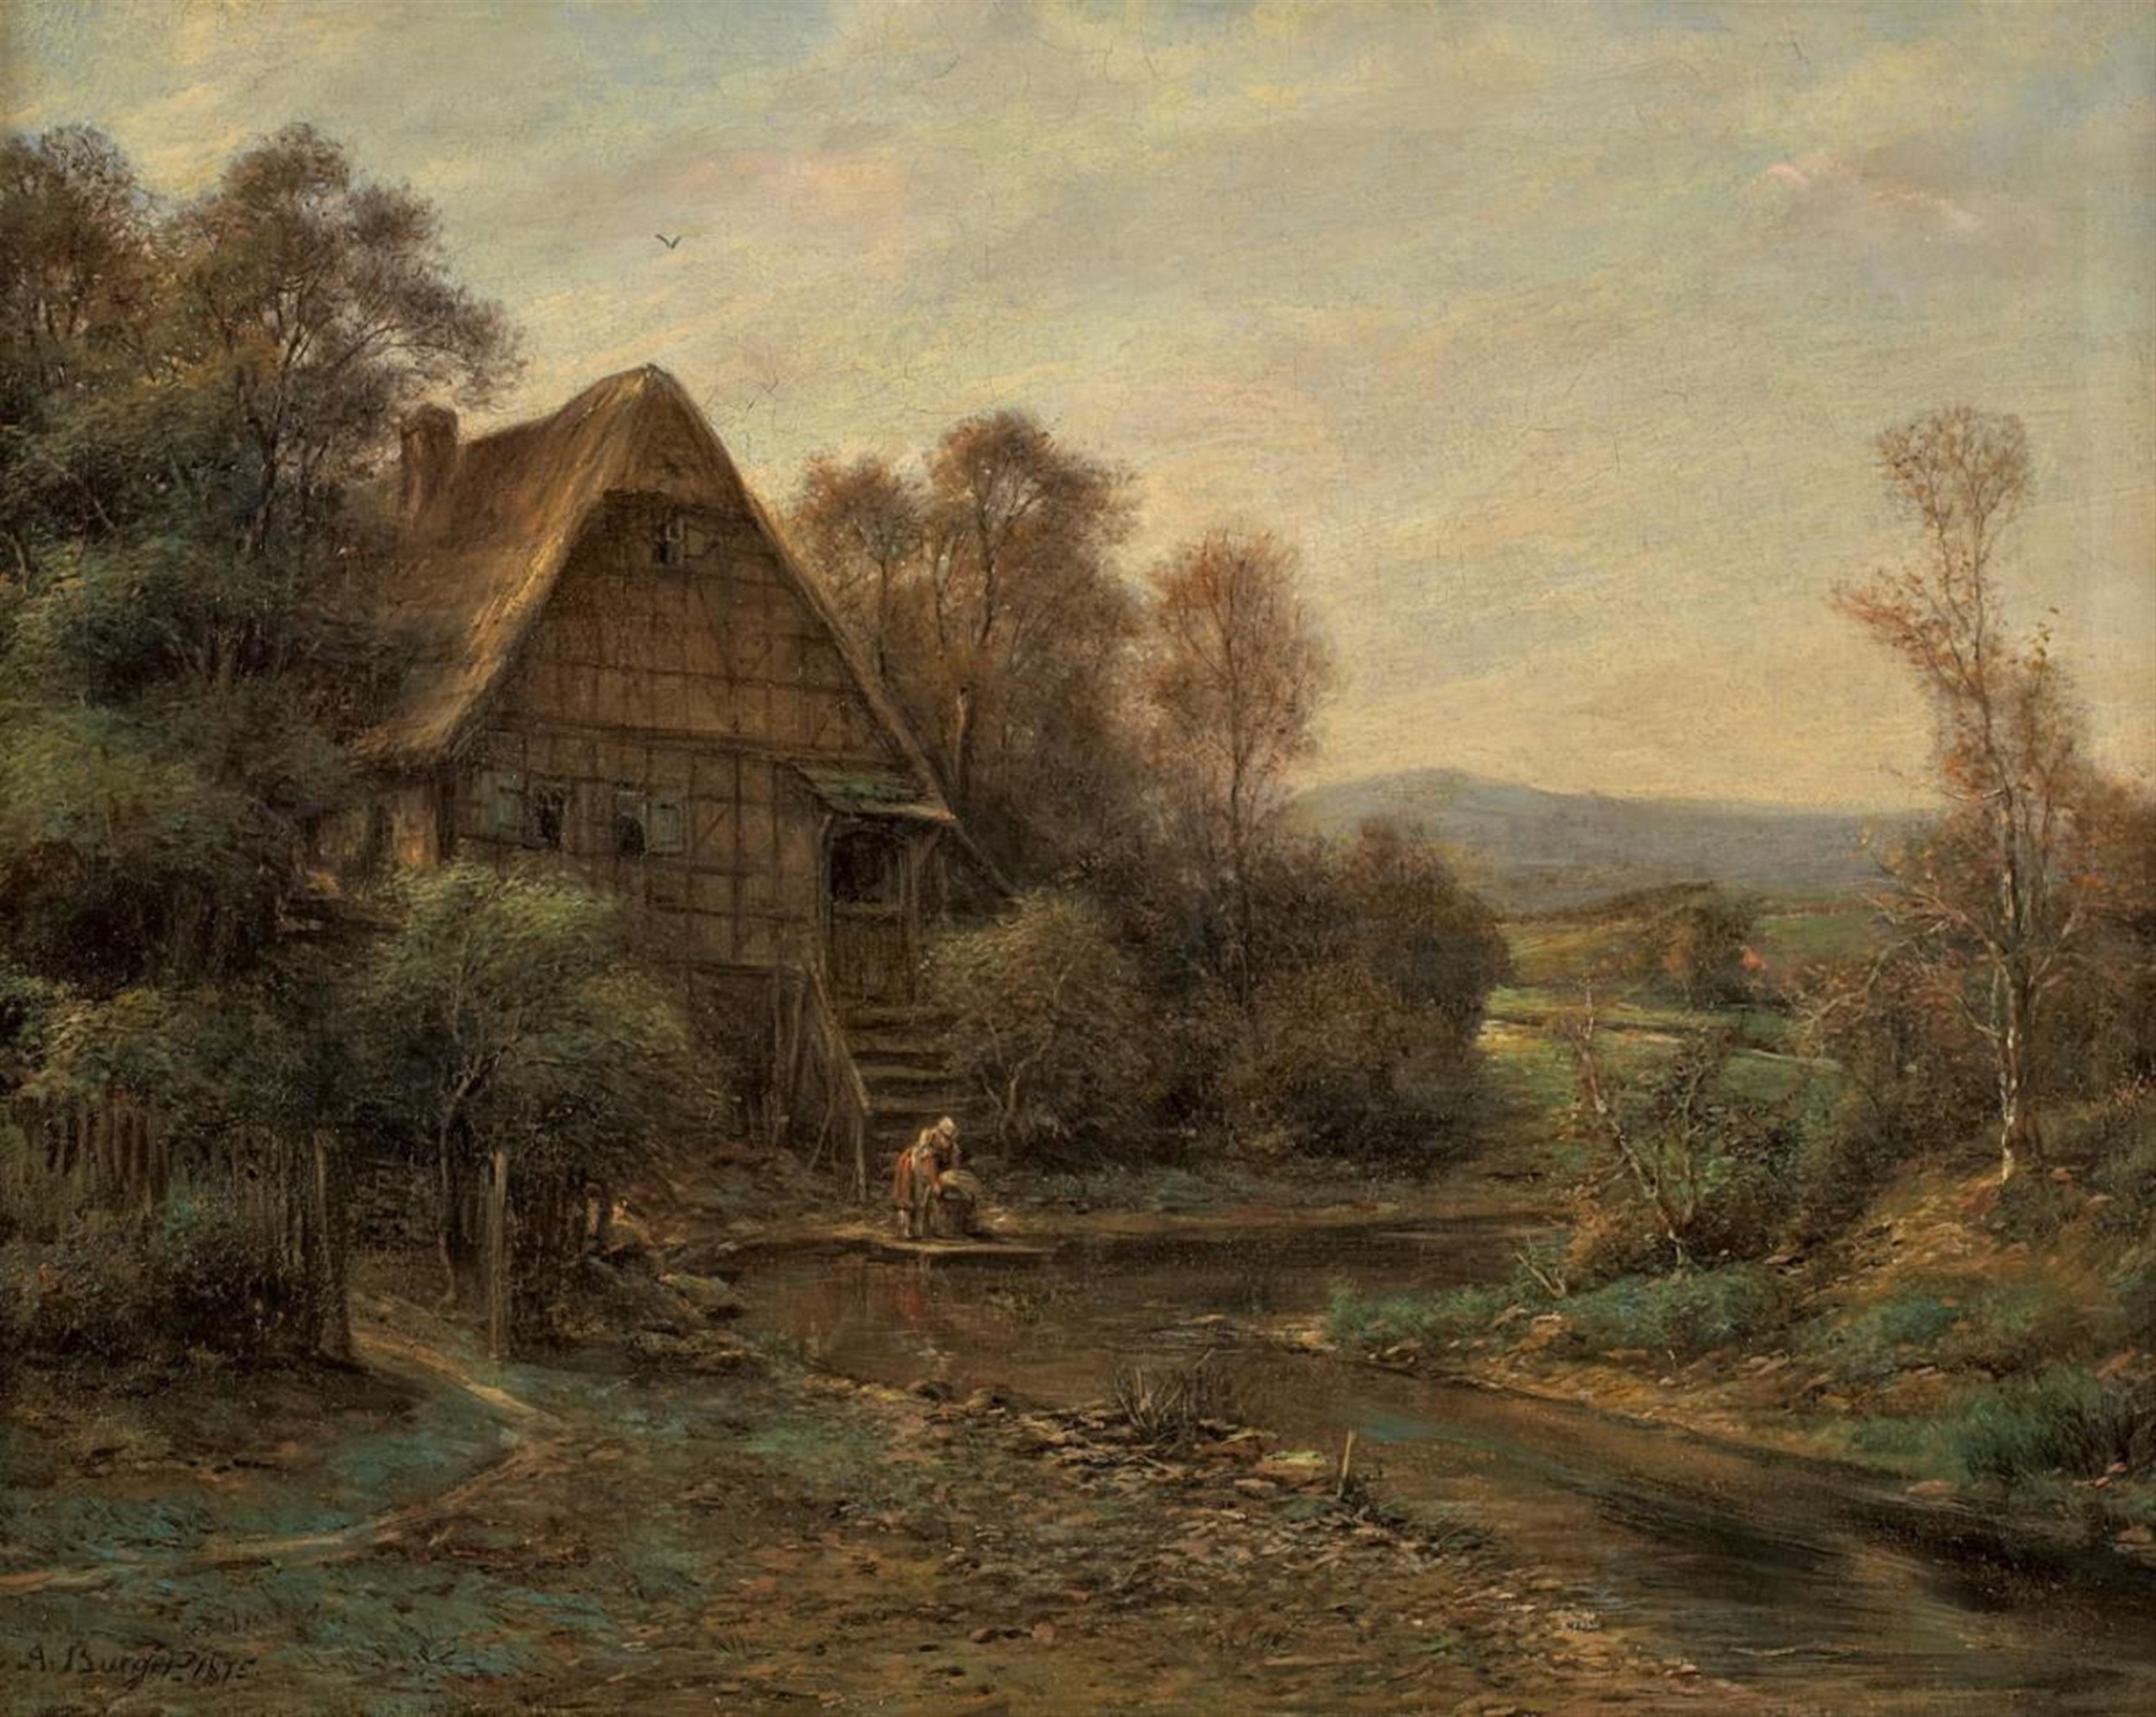 Anton Burger - LANDSCAPE WITH FRAME HOUSE AND A WASHERWOMAN AT A STREAM - image-1